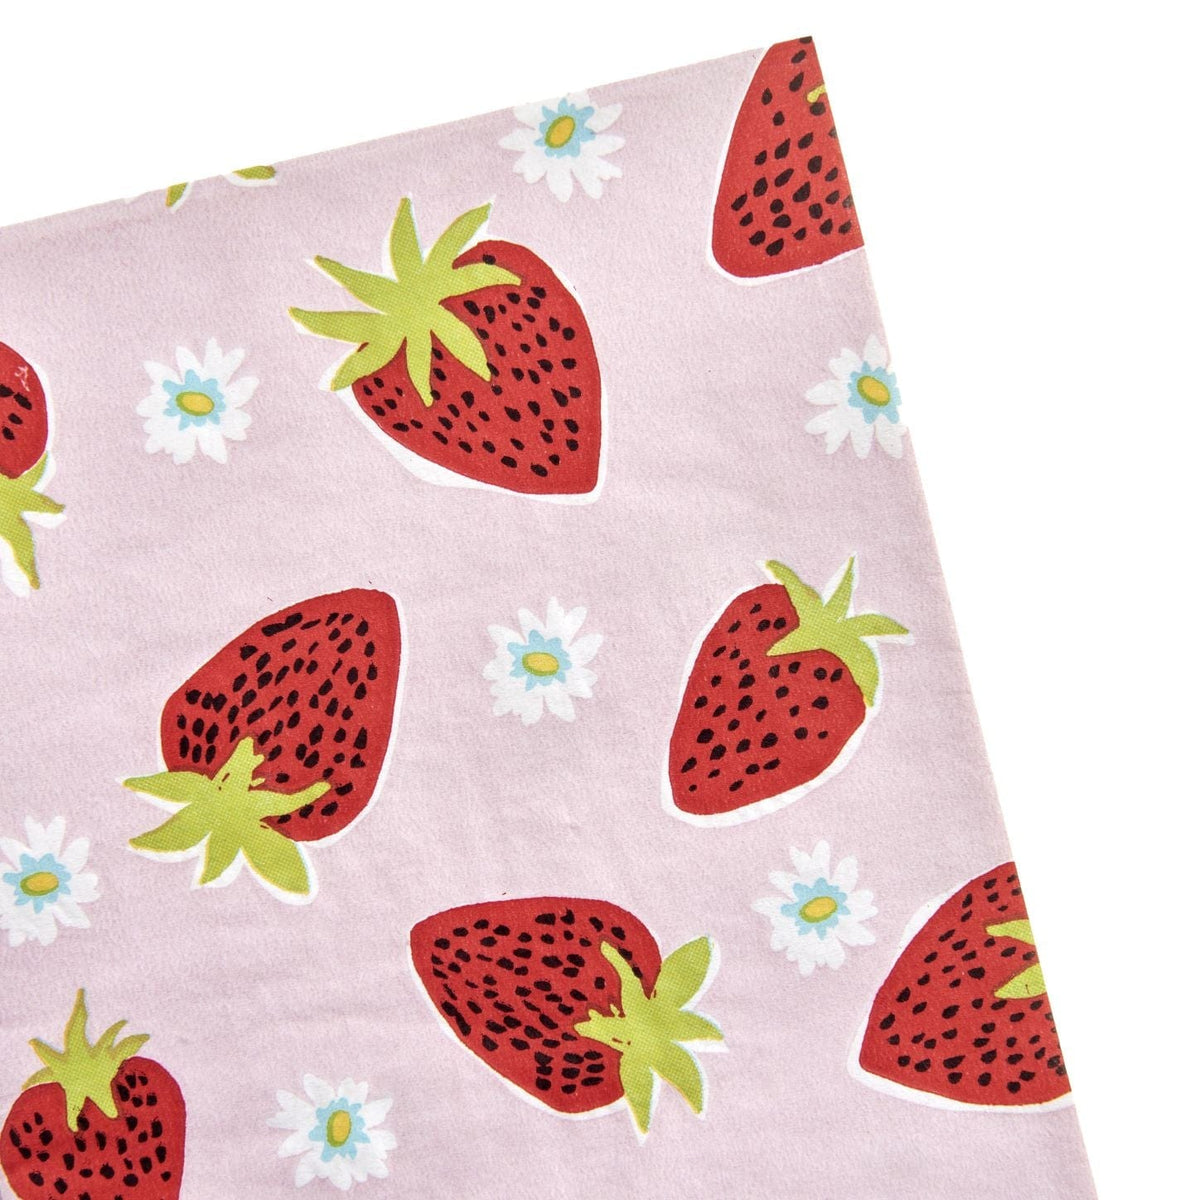 Strawberry Dinner Napkins - 40 Count Roobee Napkins 89212